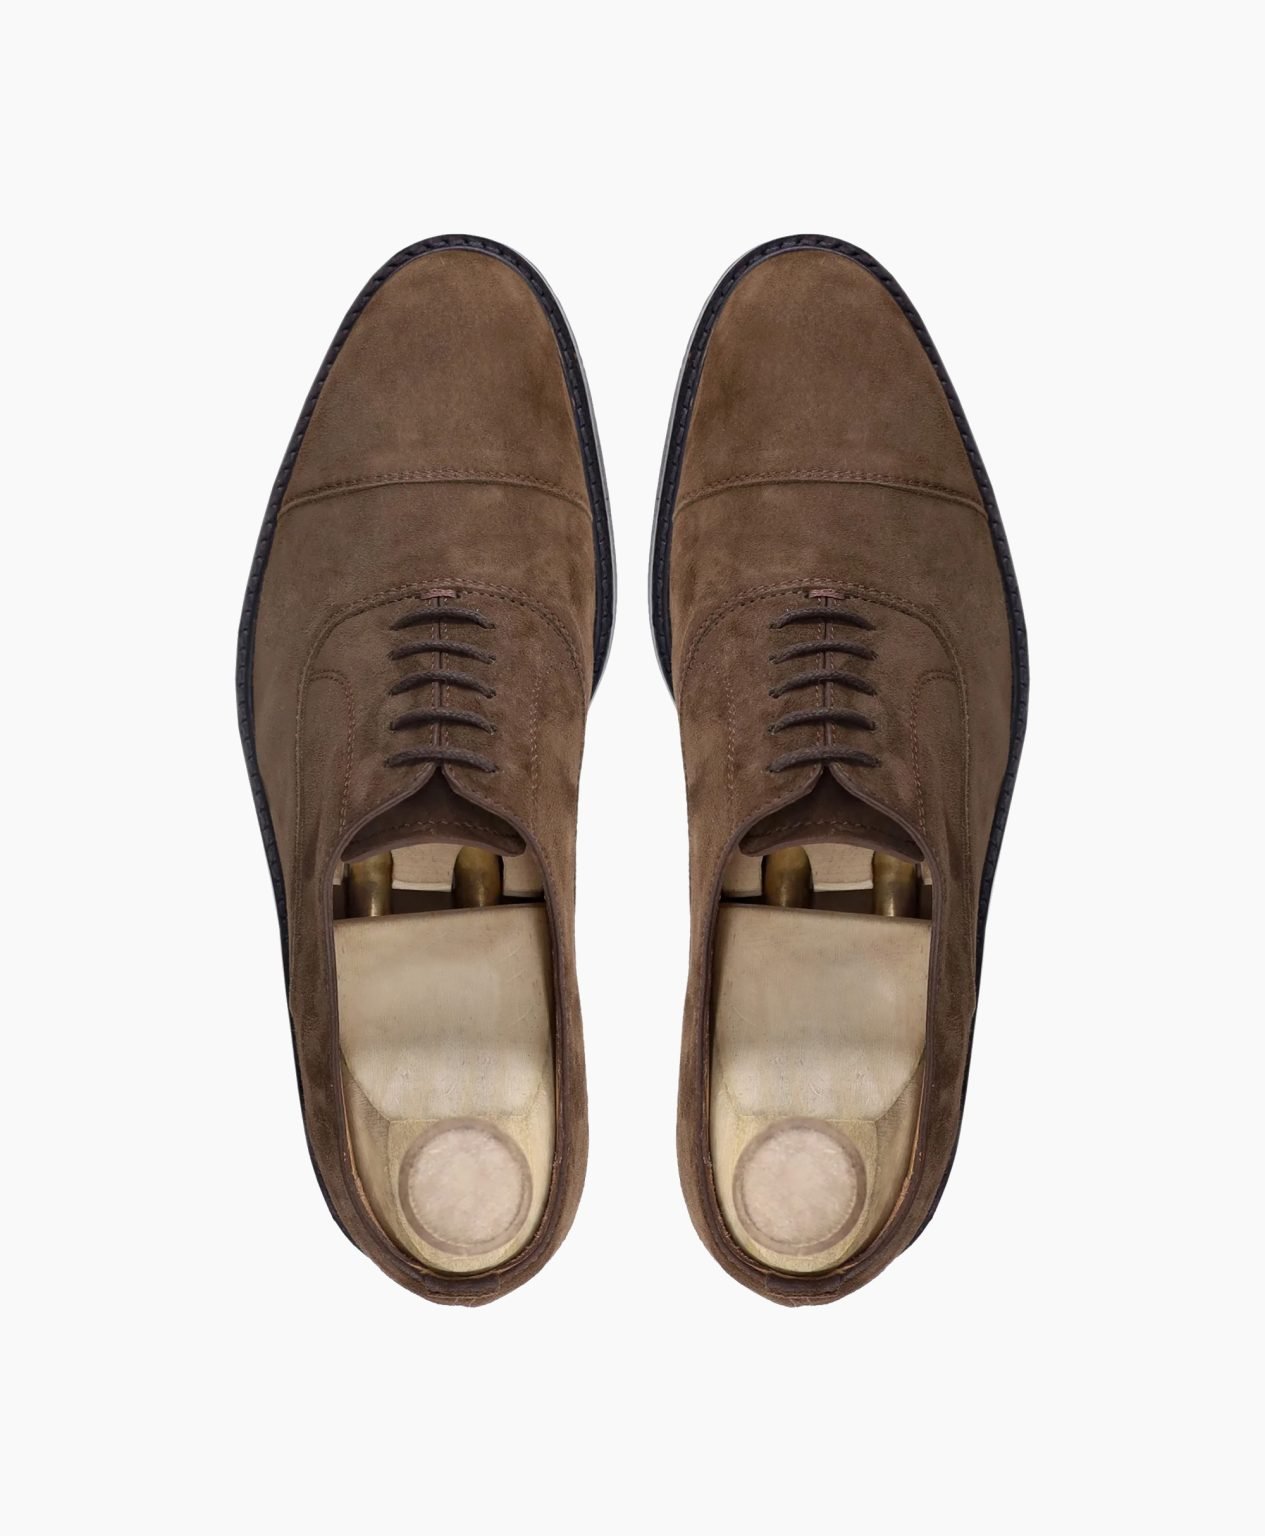 congleton-oxford-dark-brown-suede-leather-shoes-image202